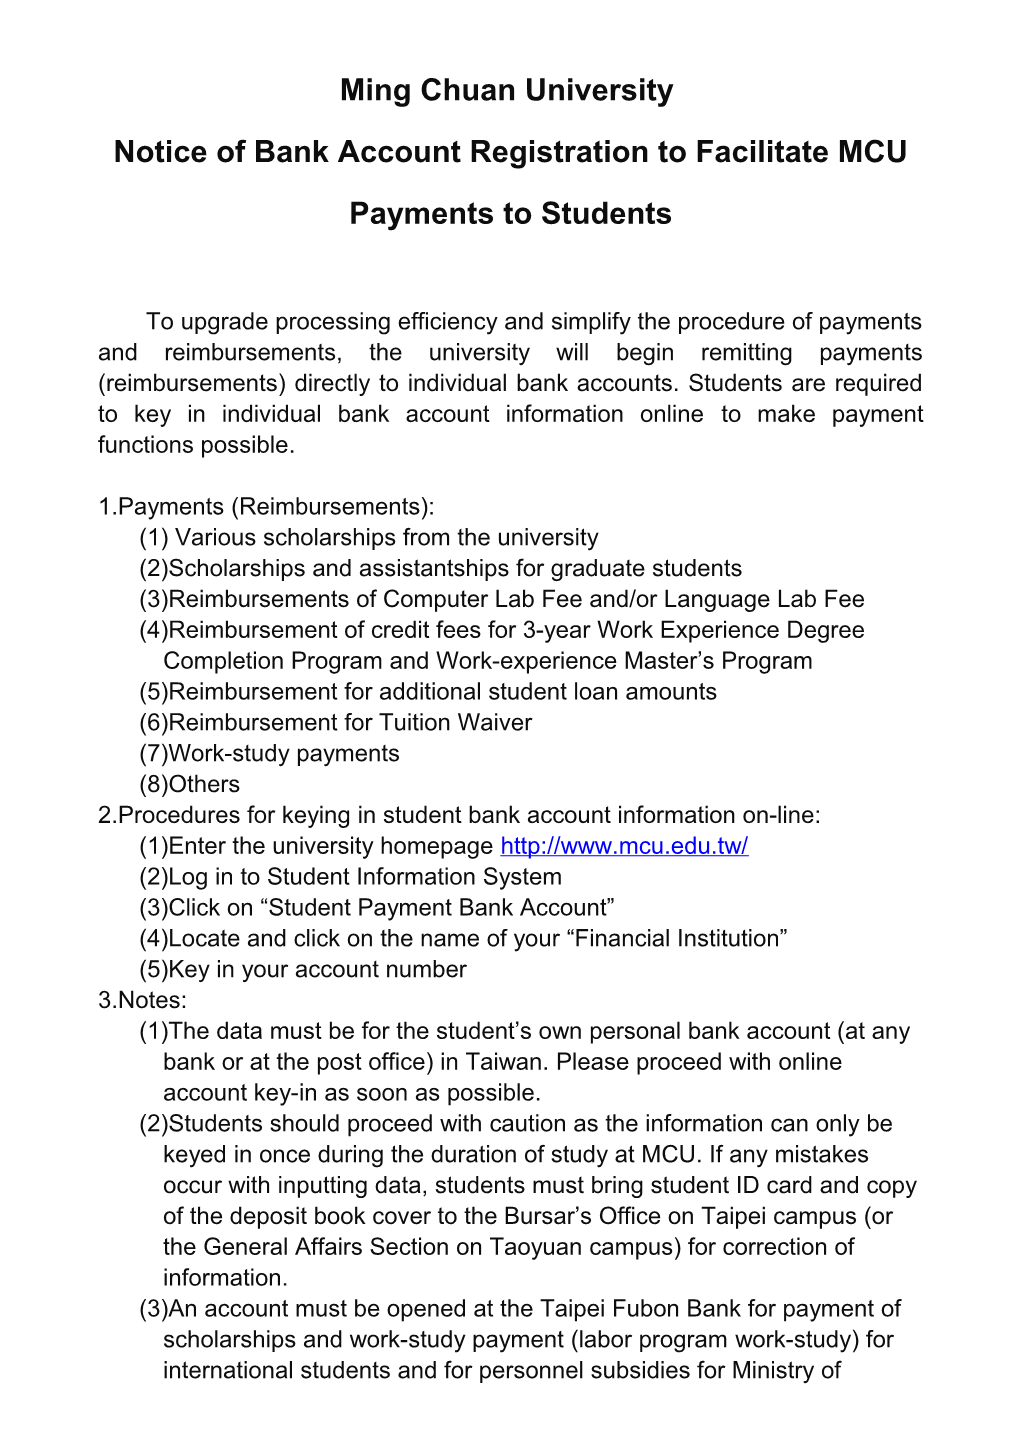 Notice of Bank Account Registration to Facilitate MCU Payments to Students